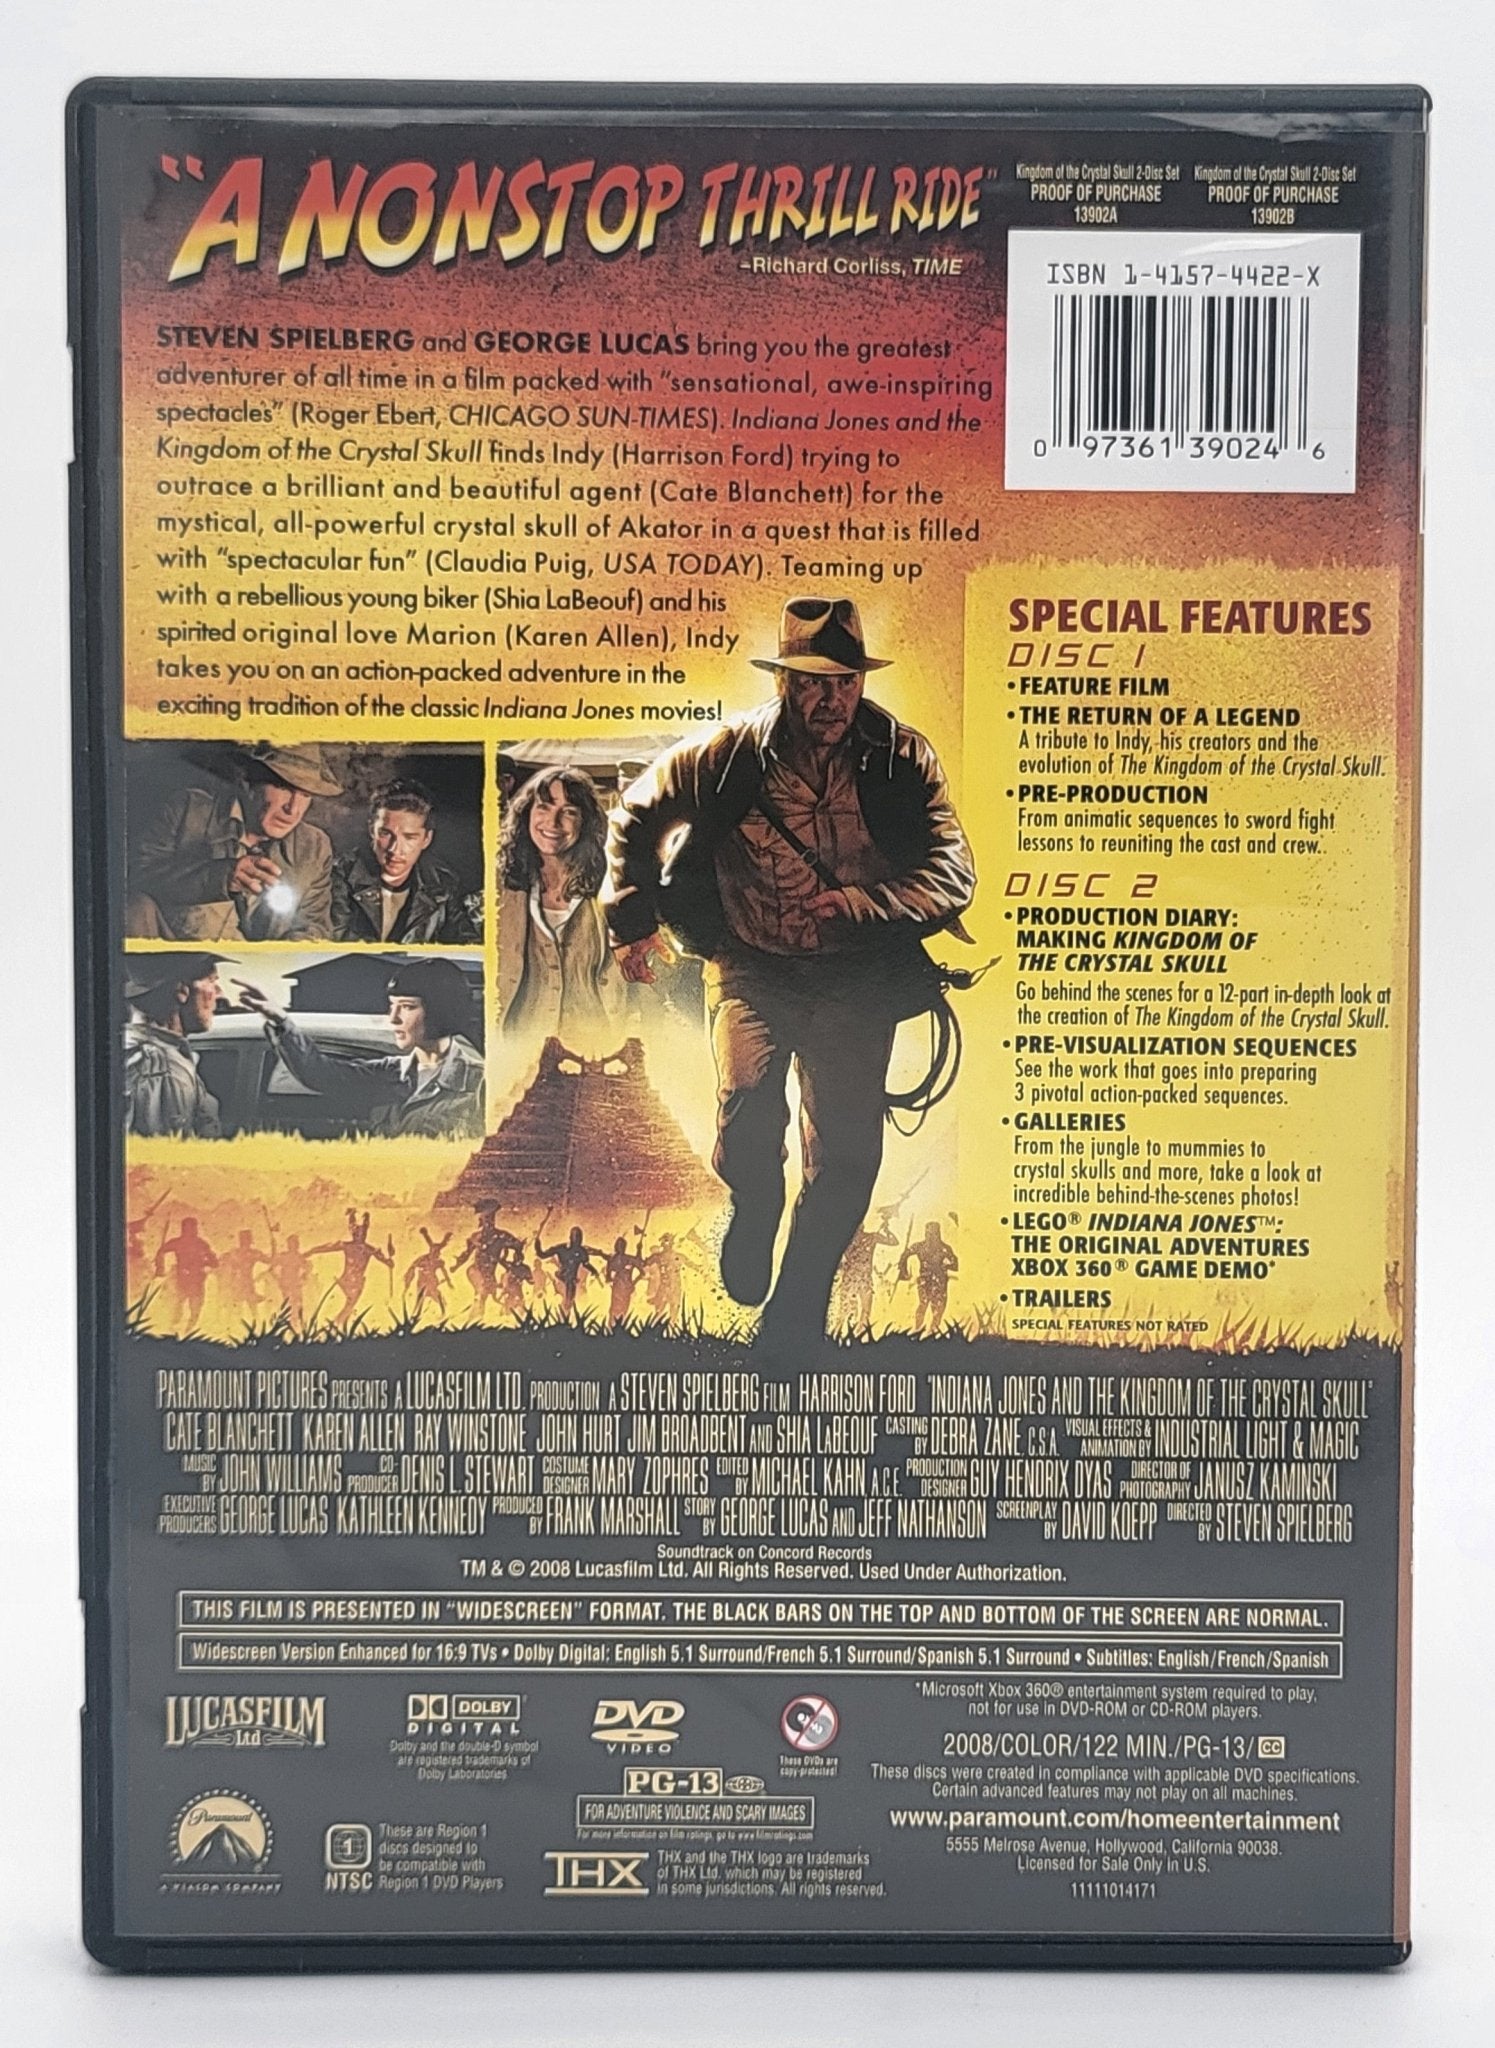 Paramount Home Entertainment - Indiana Jones - and the Kingdom of the Crystal Skull | DVD | 2 Disc Special Edition - DVD - Steady Bunny Shop